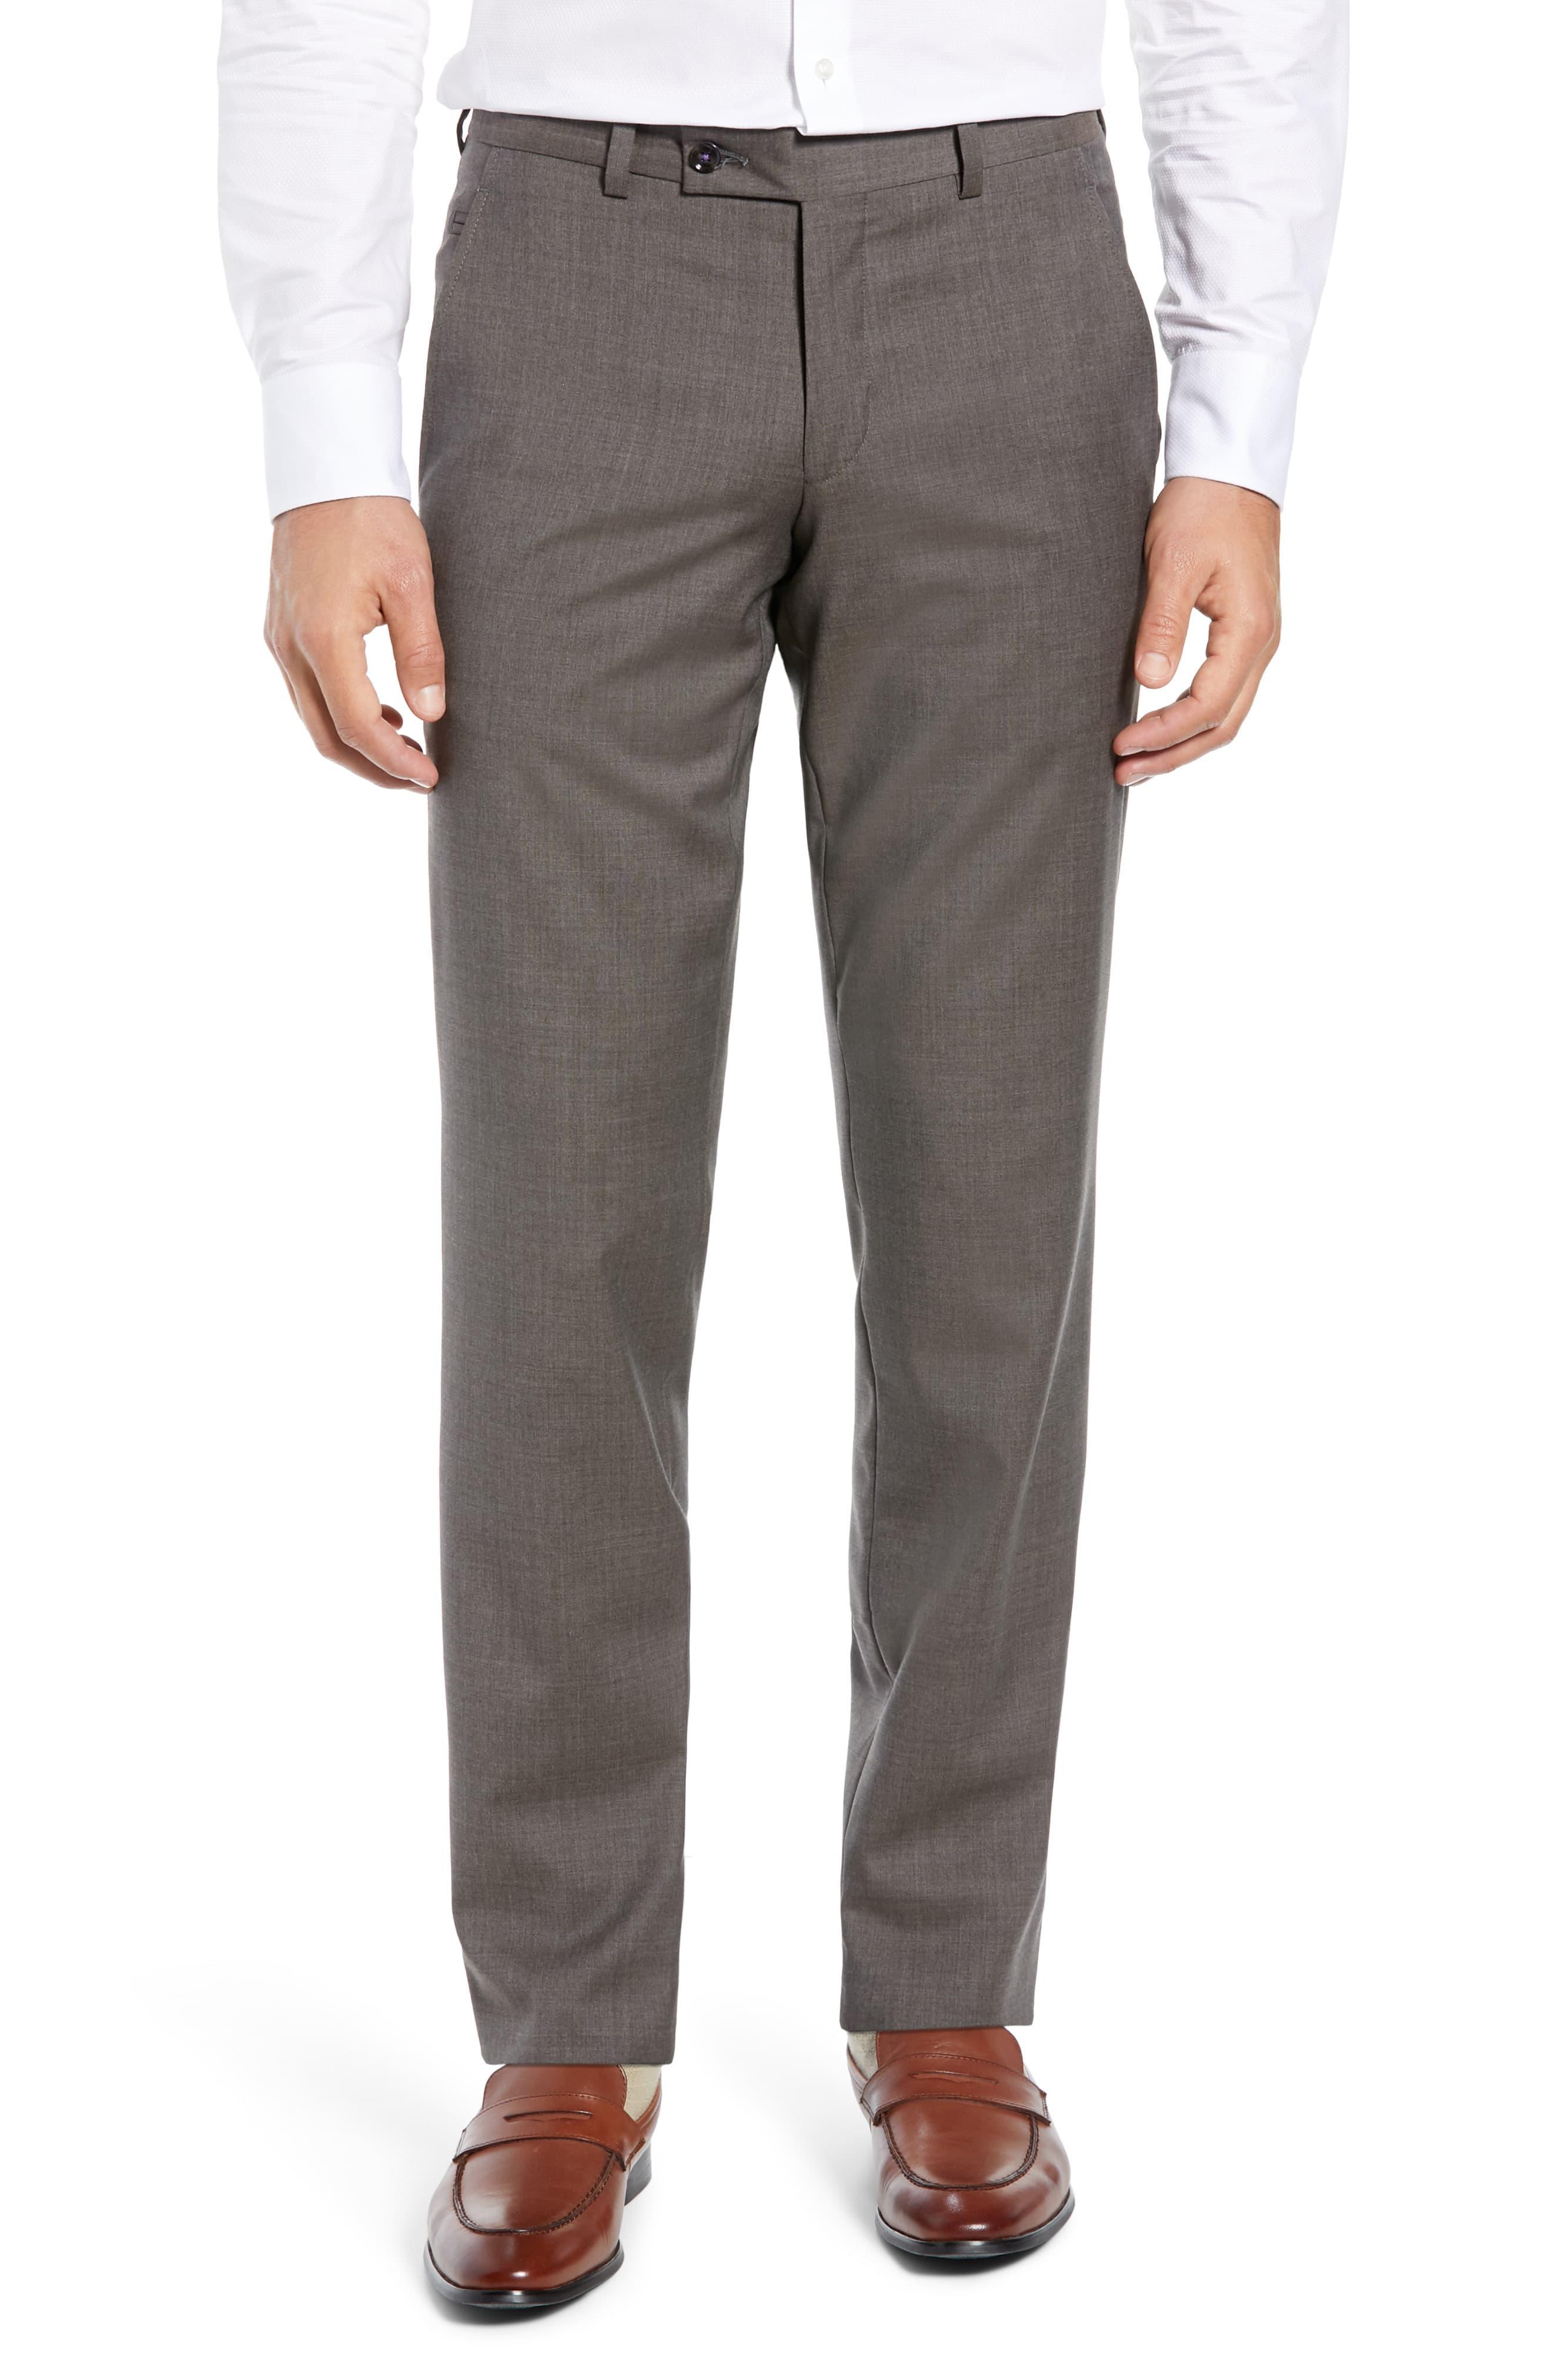 Ted Baker Jerome Flat Front Solid Wool Dress Pants in Brown for Men - Lyst